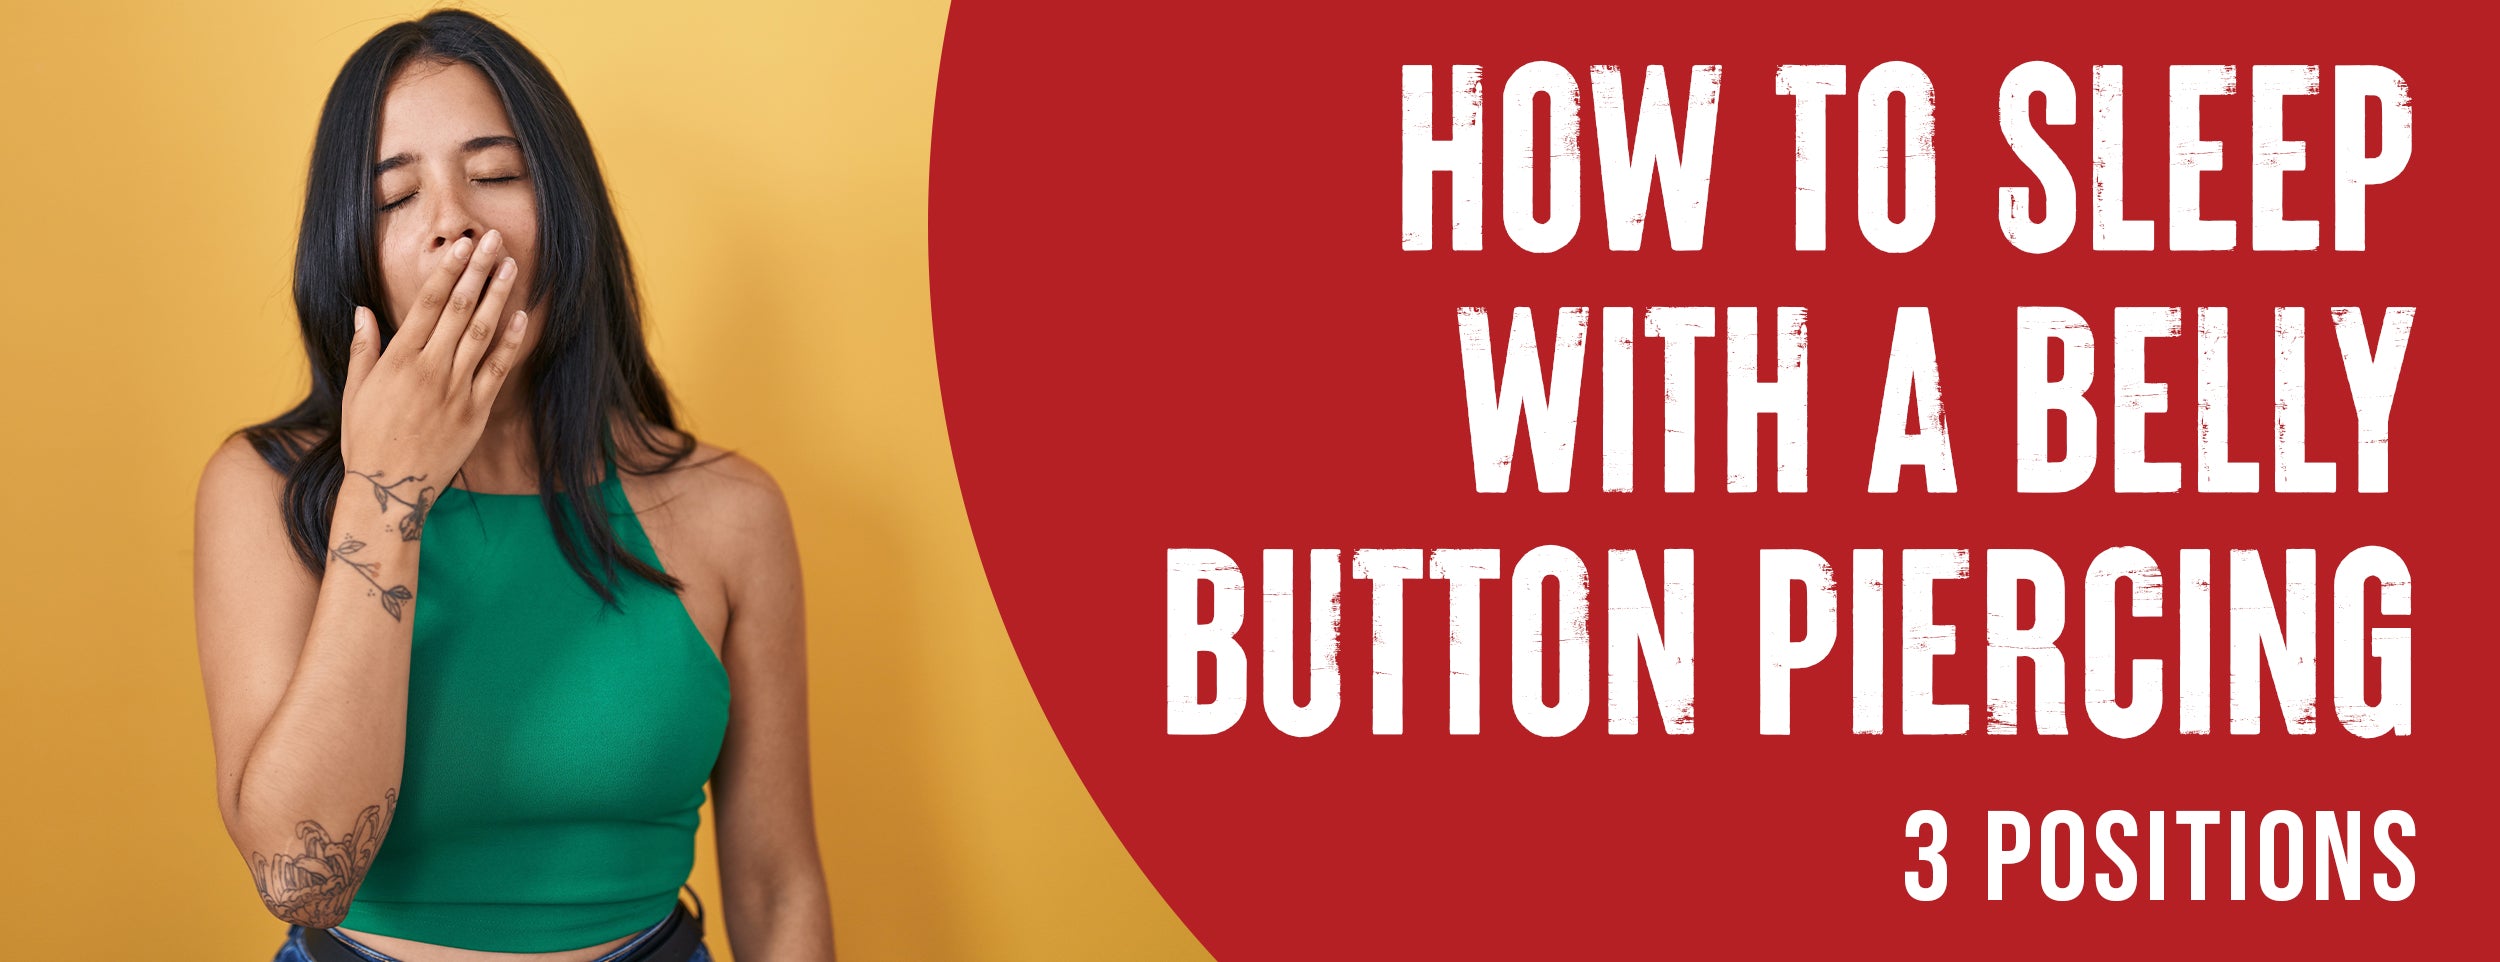 3 Best Sleeping Positions & Tips for Protecting Your Belly Button Piercing